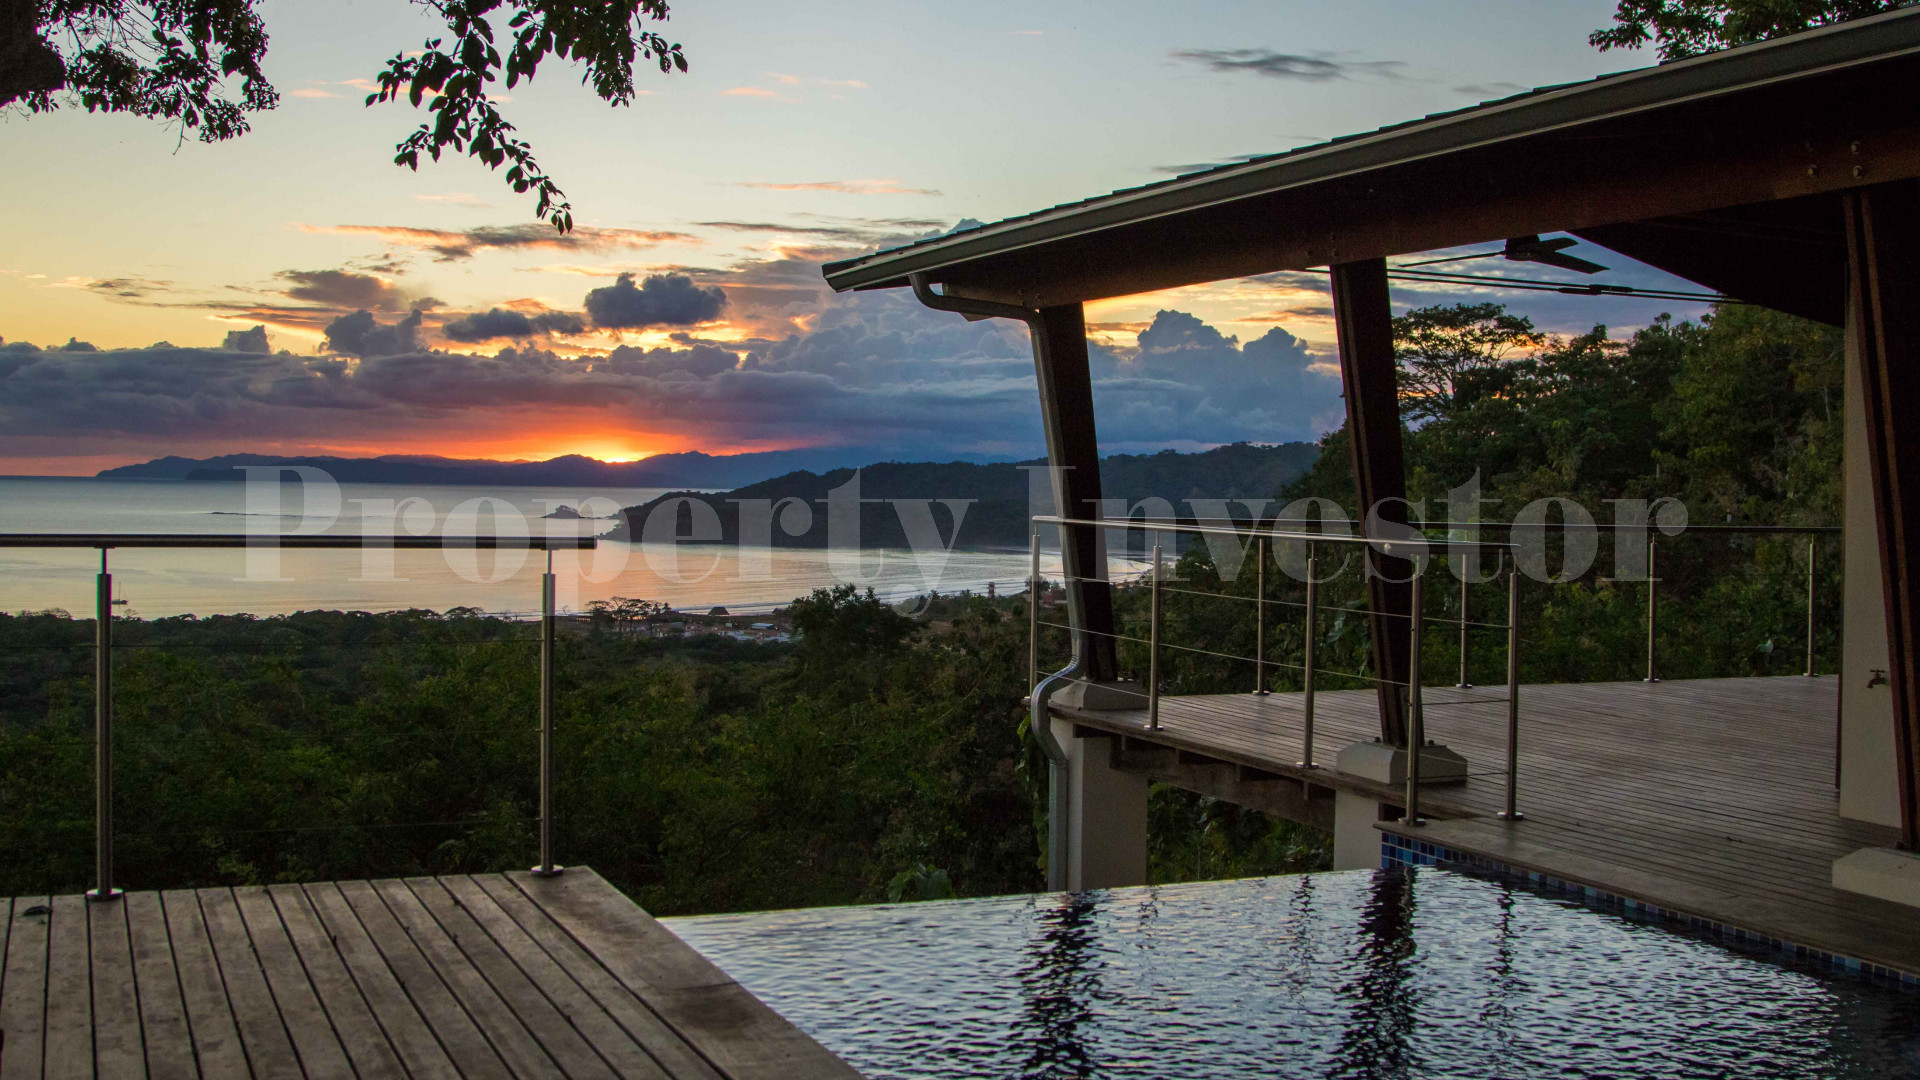 Spectacular 4 Bedroom Luxury Ocean View Home with 360° Panoramic Views for Sale in Playa Venao, Panama